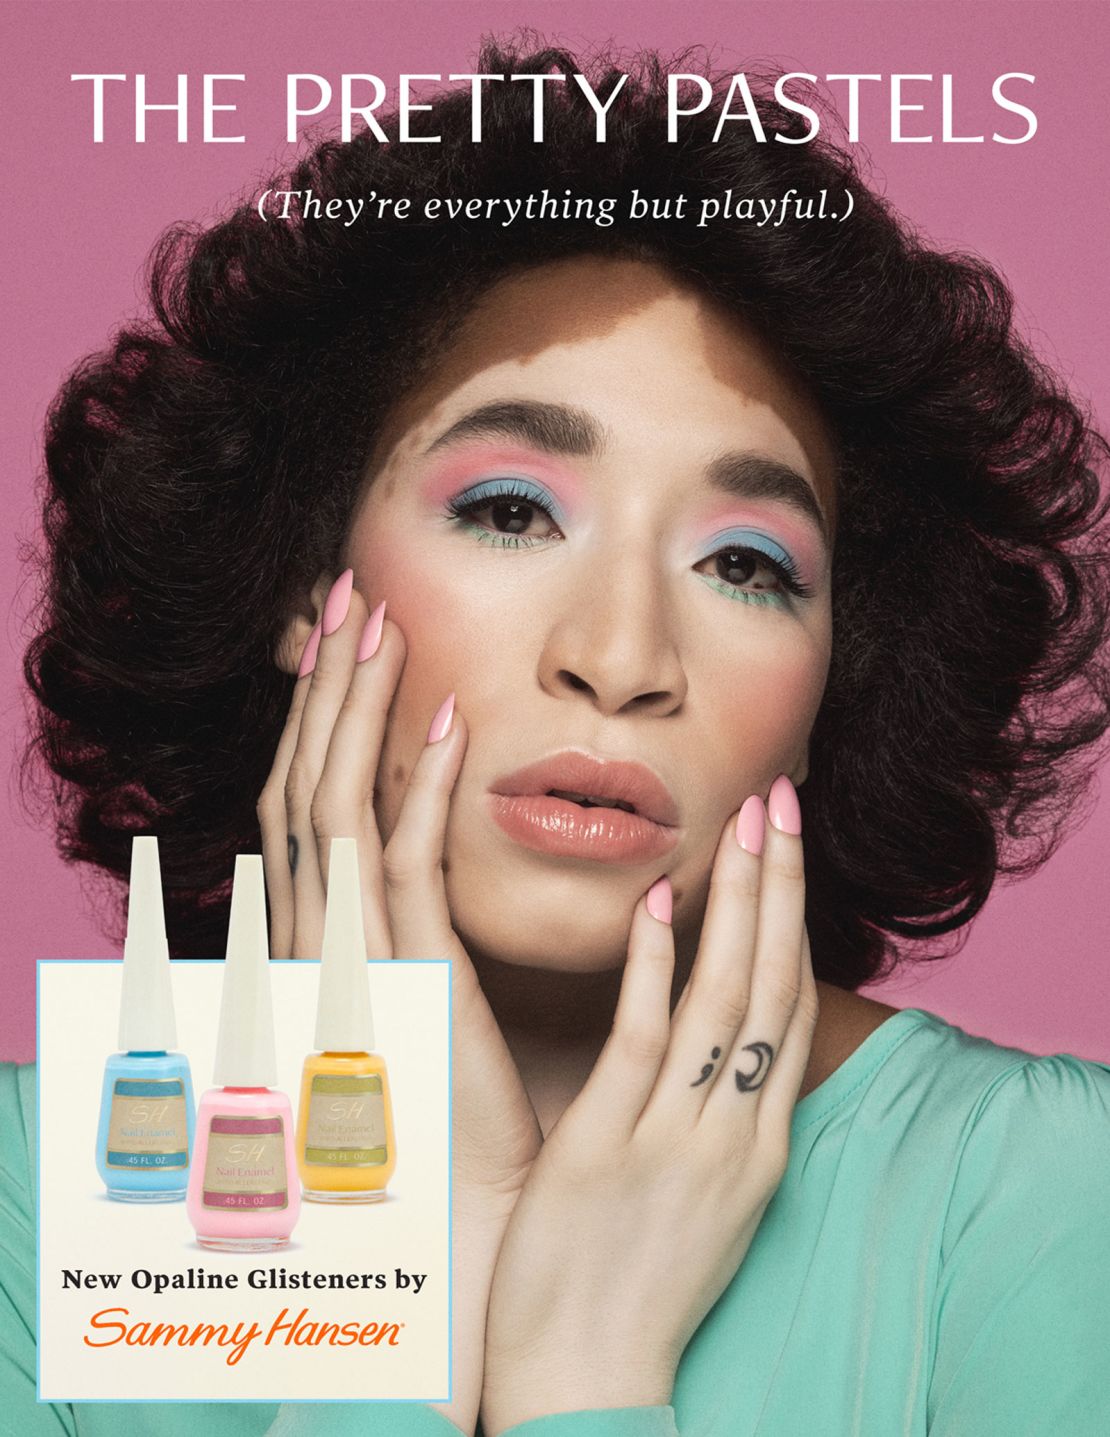 Prim'n' Poppin' aims to be a call for the beauty industry to diversify their talent pool and marketing strategies. This ad features model Jesi Taylor Cruz.